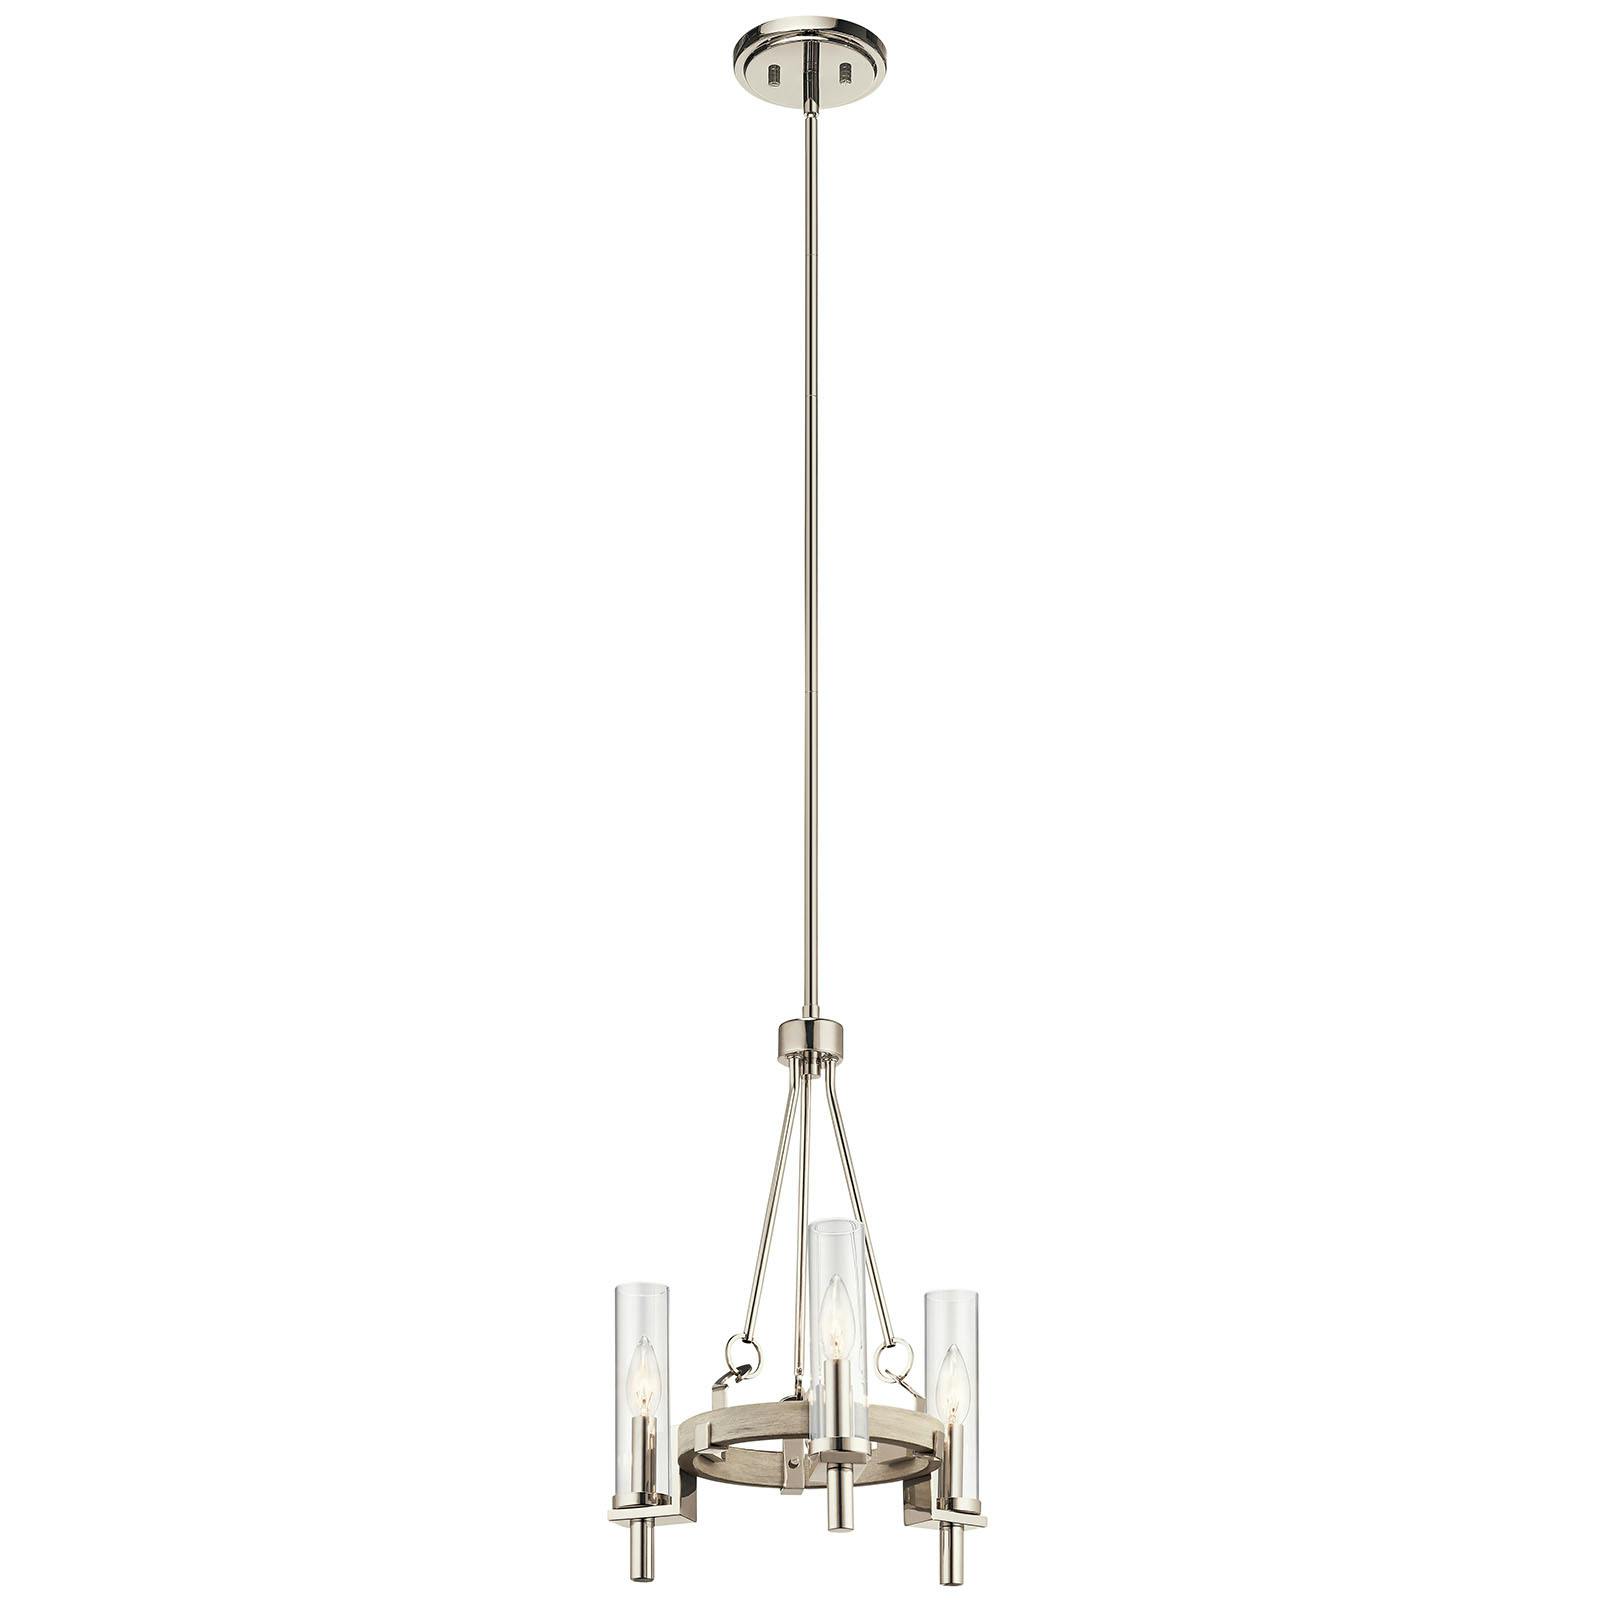 Telan 3 Light Chandelier White Washed on a white background